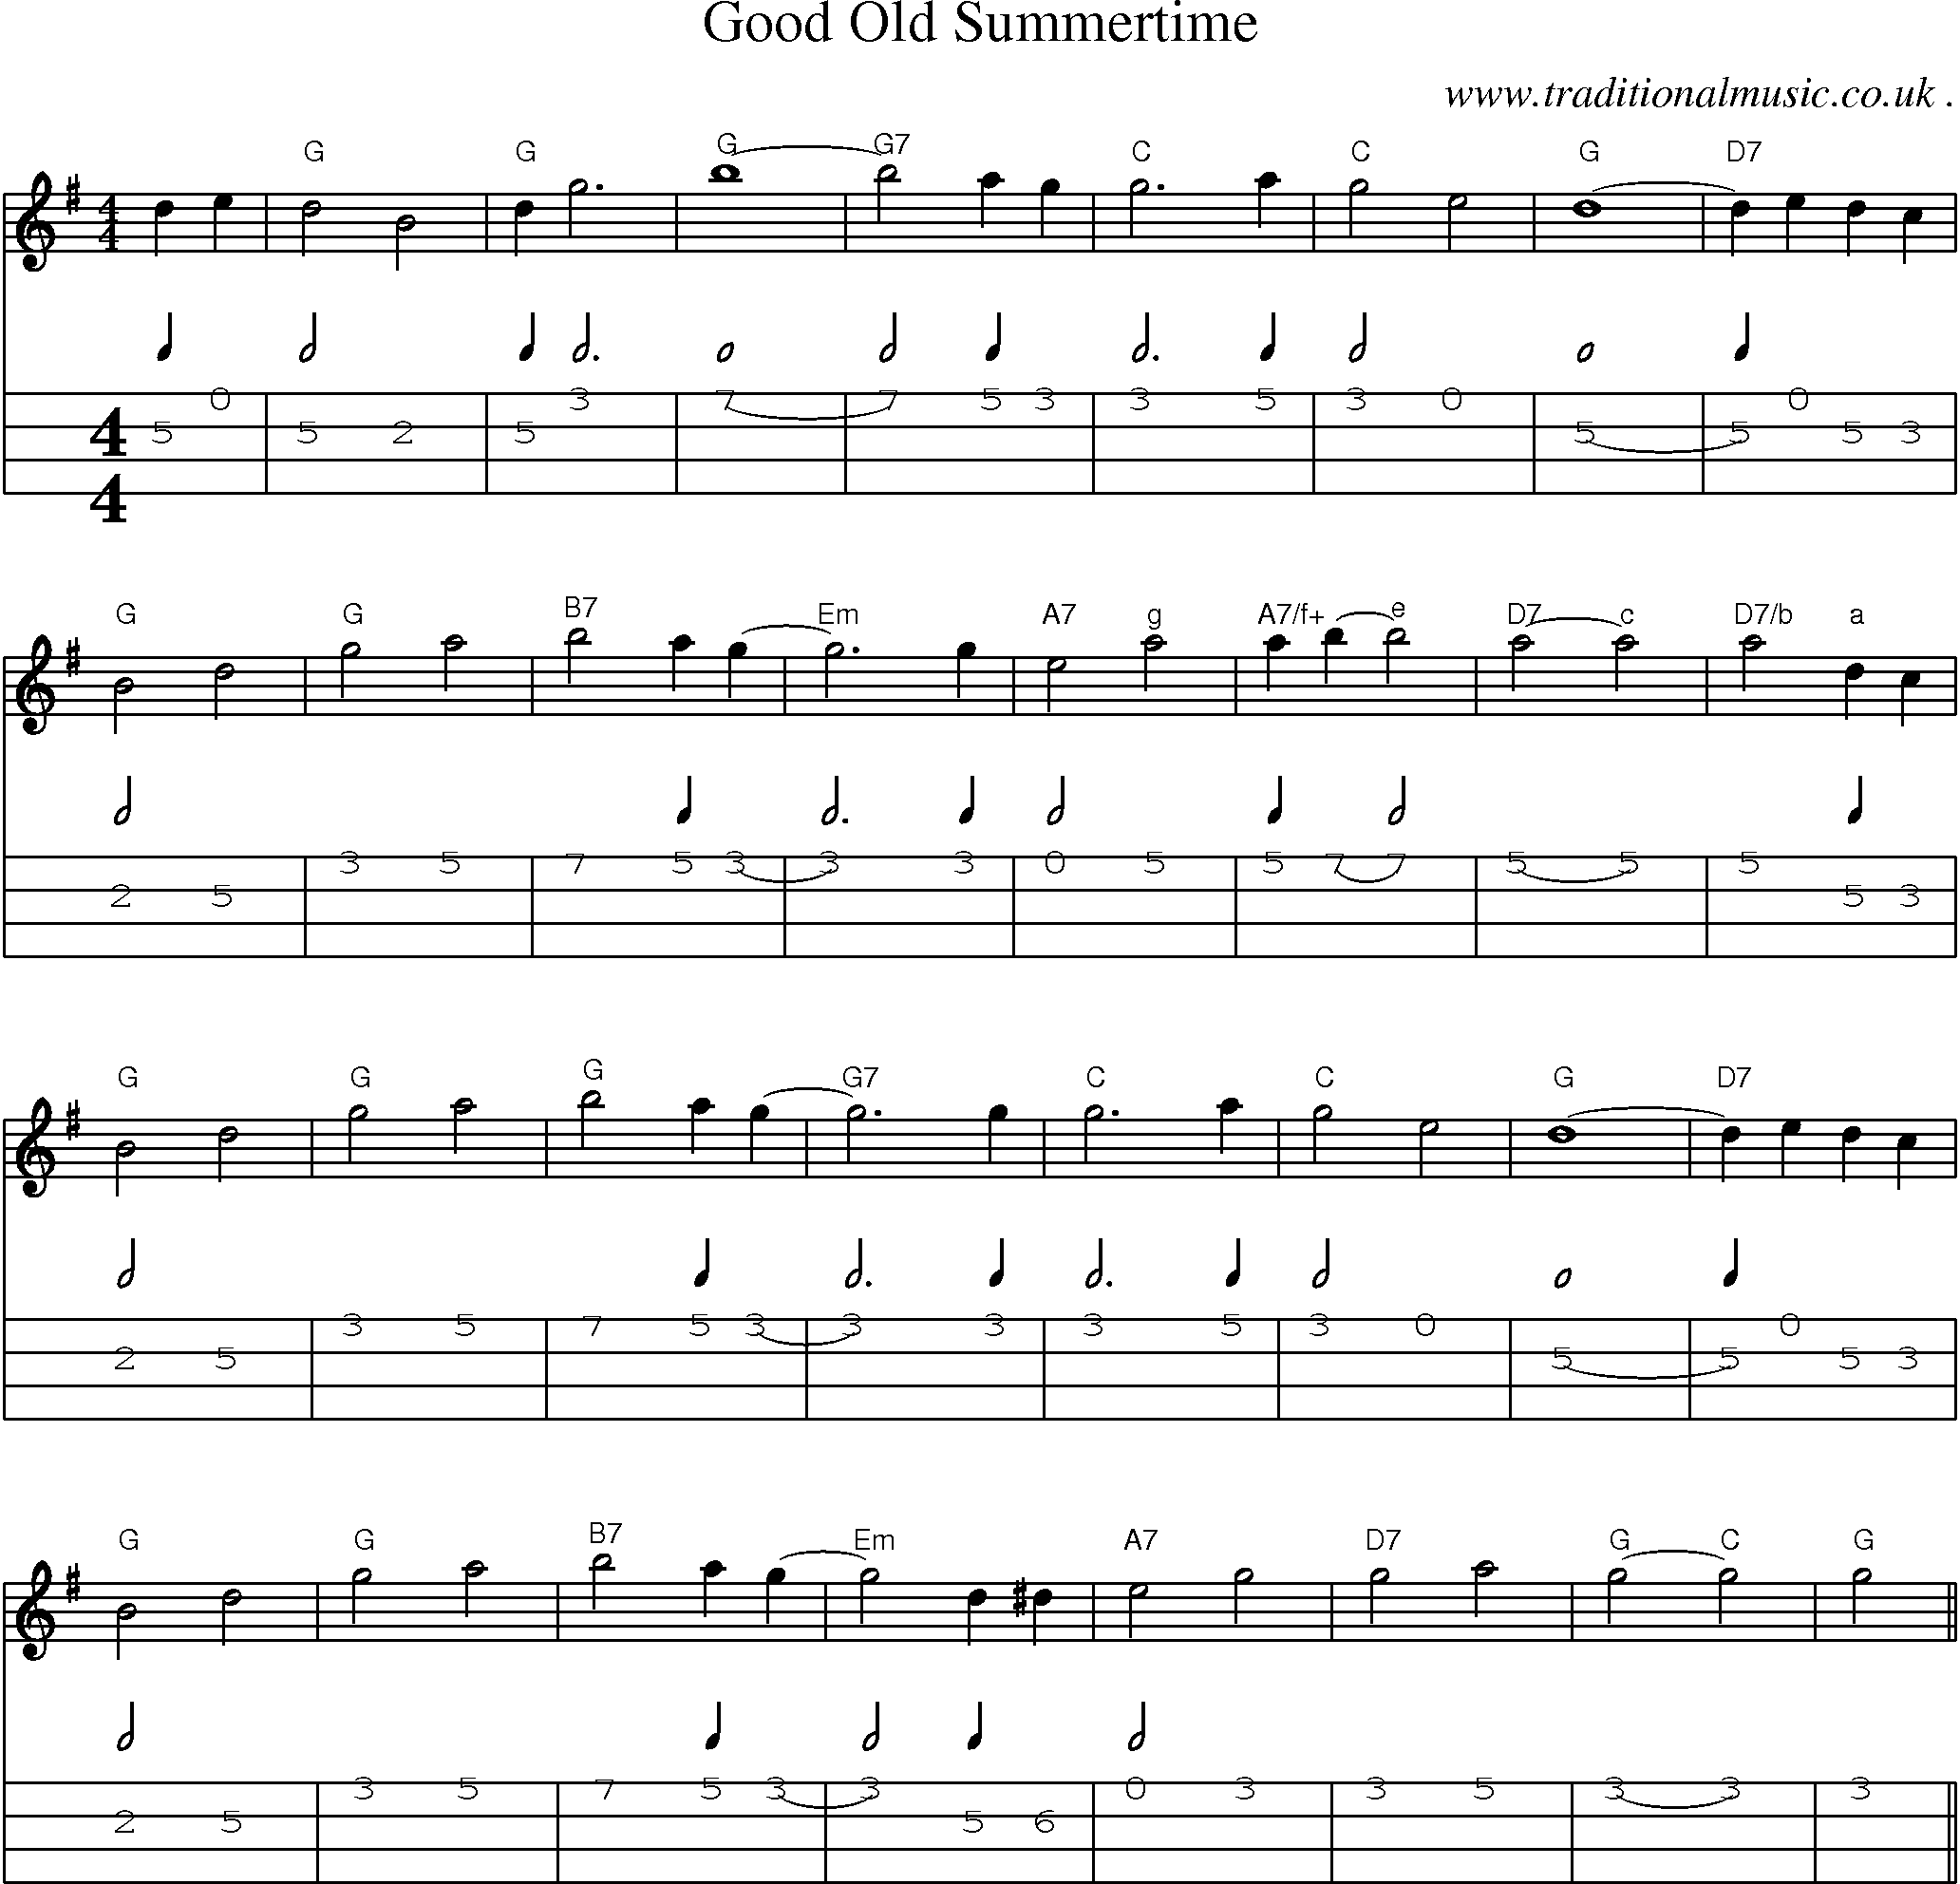 Music Score and Guitar Tabs for Good Old Summertime